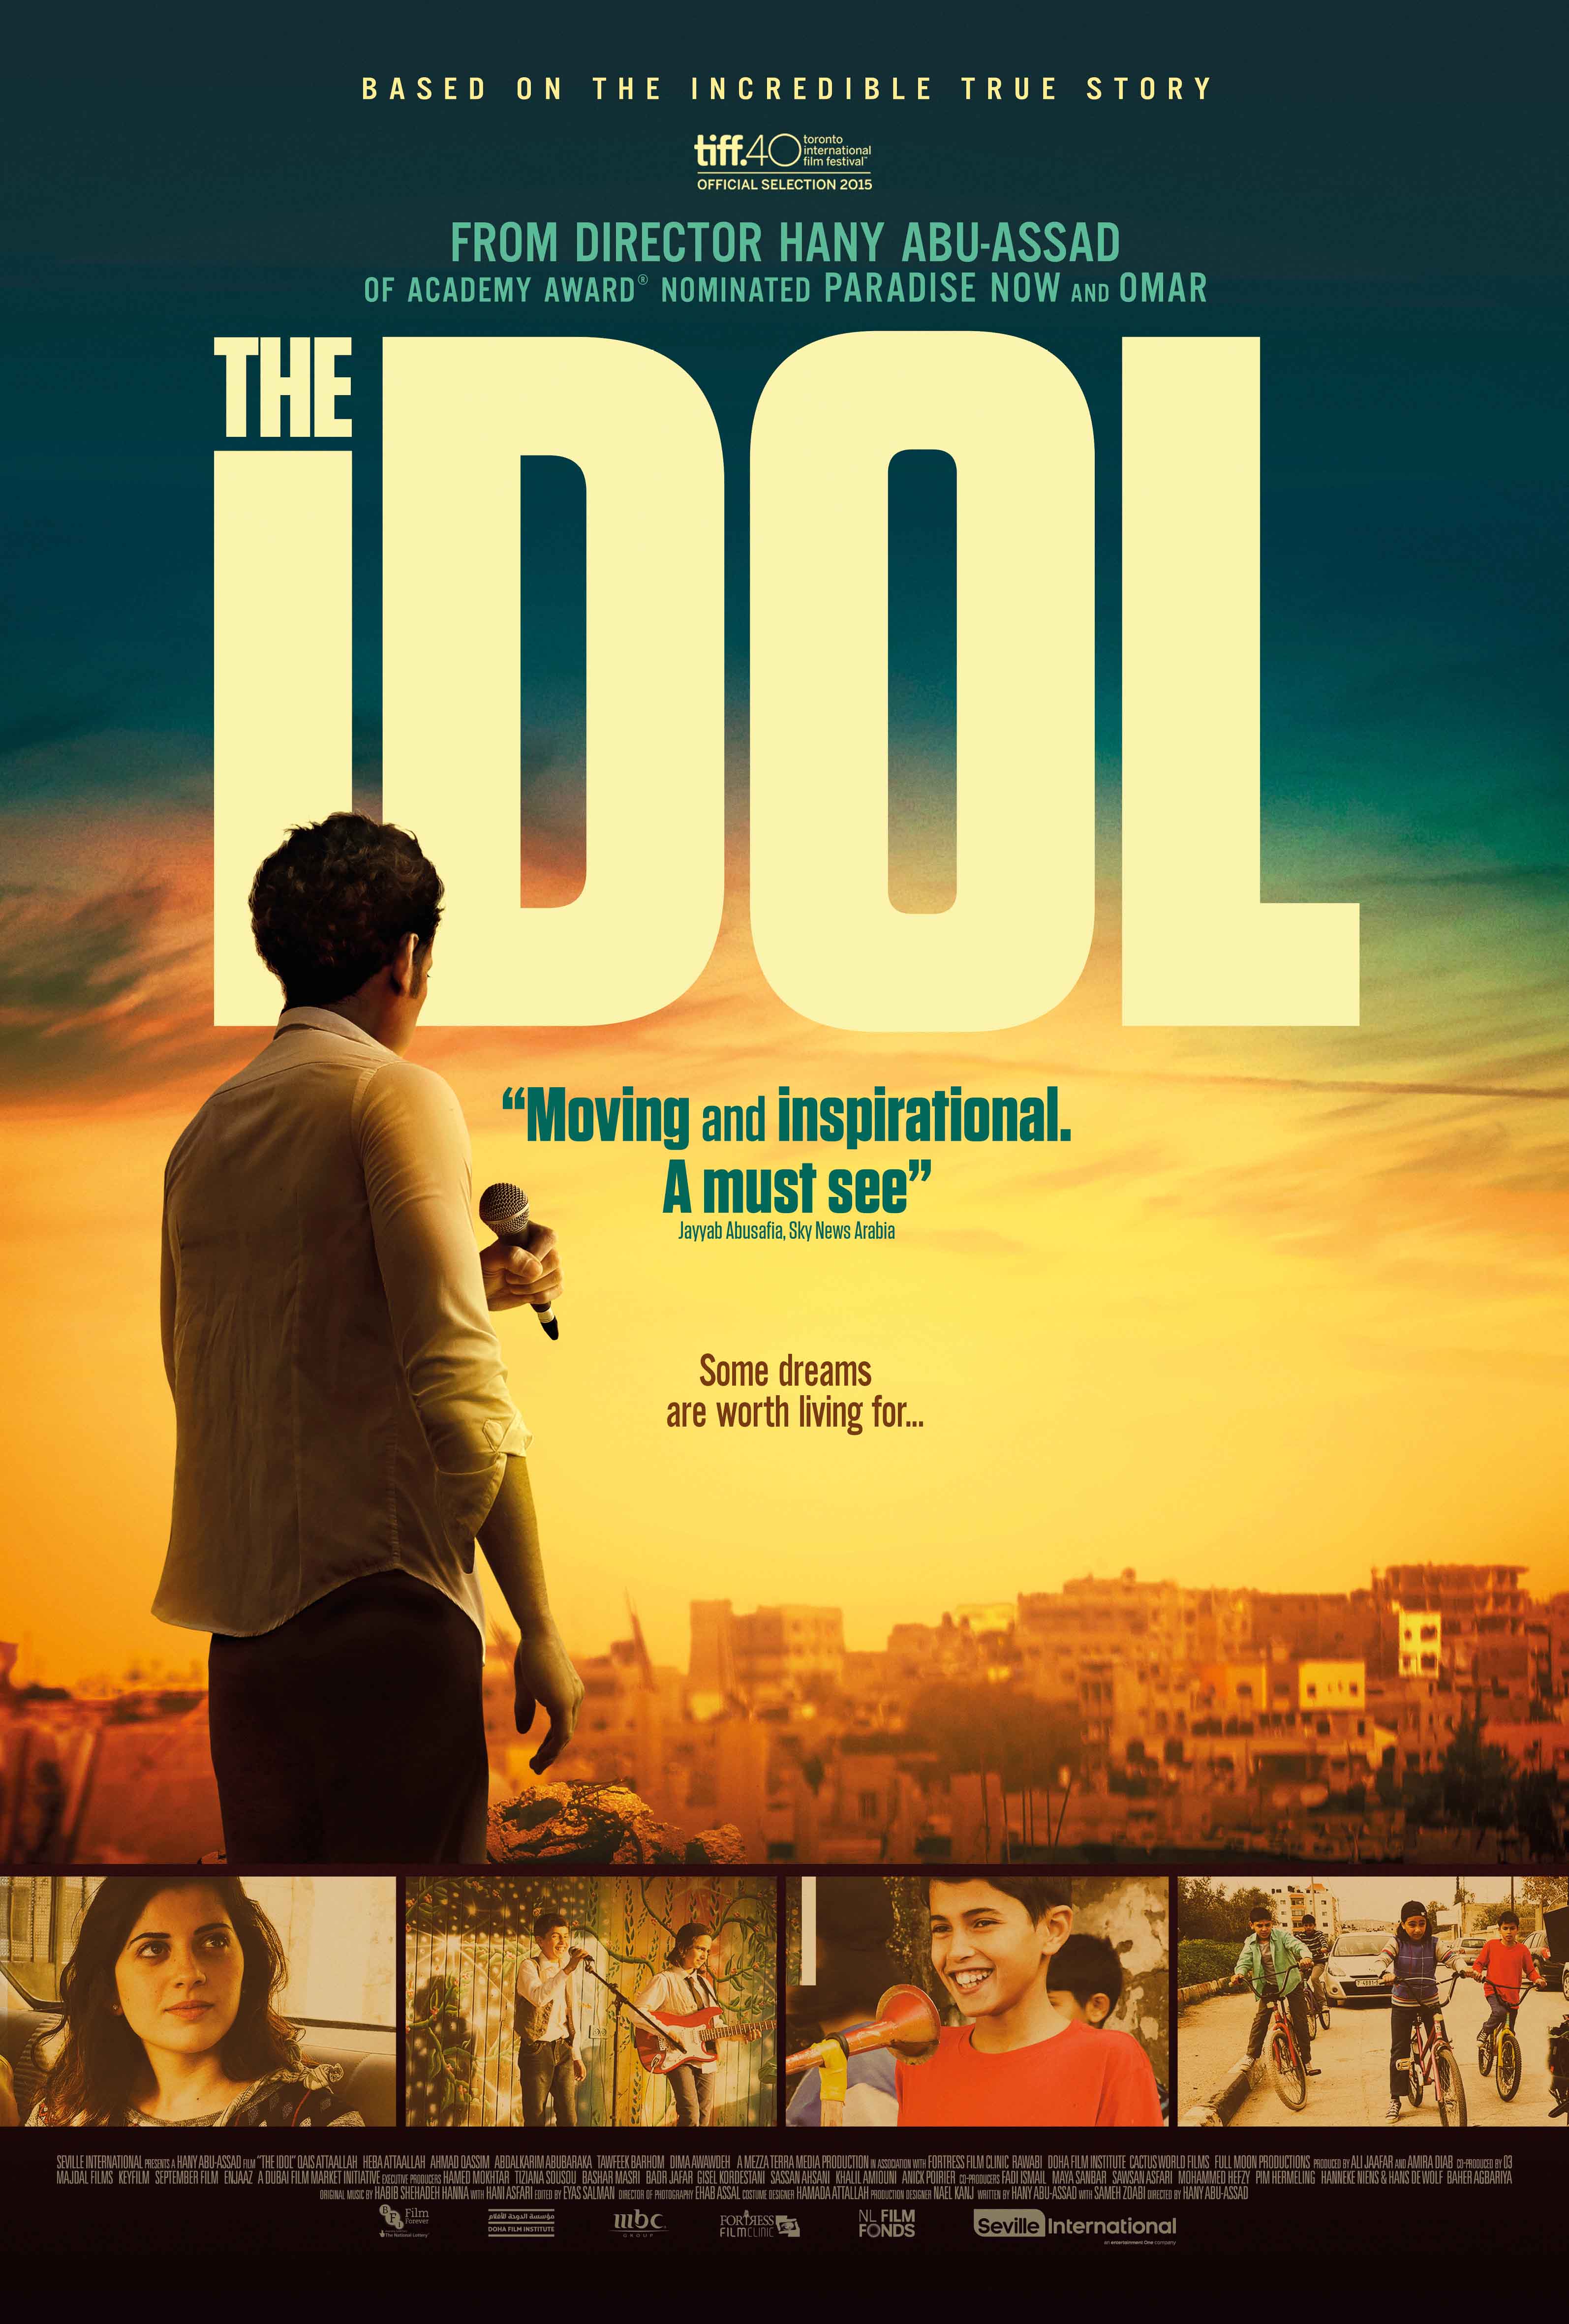 The Idol poster compressed